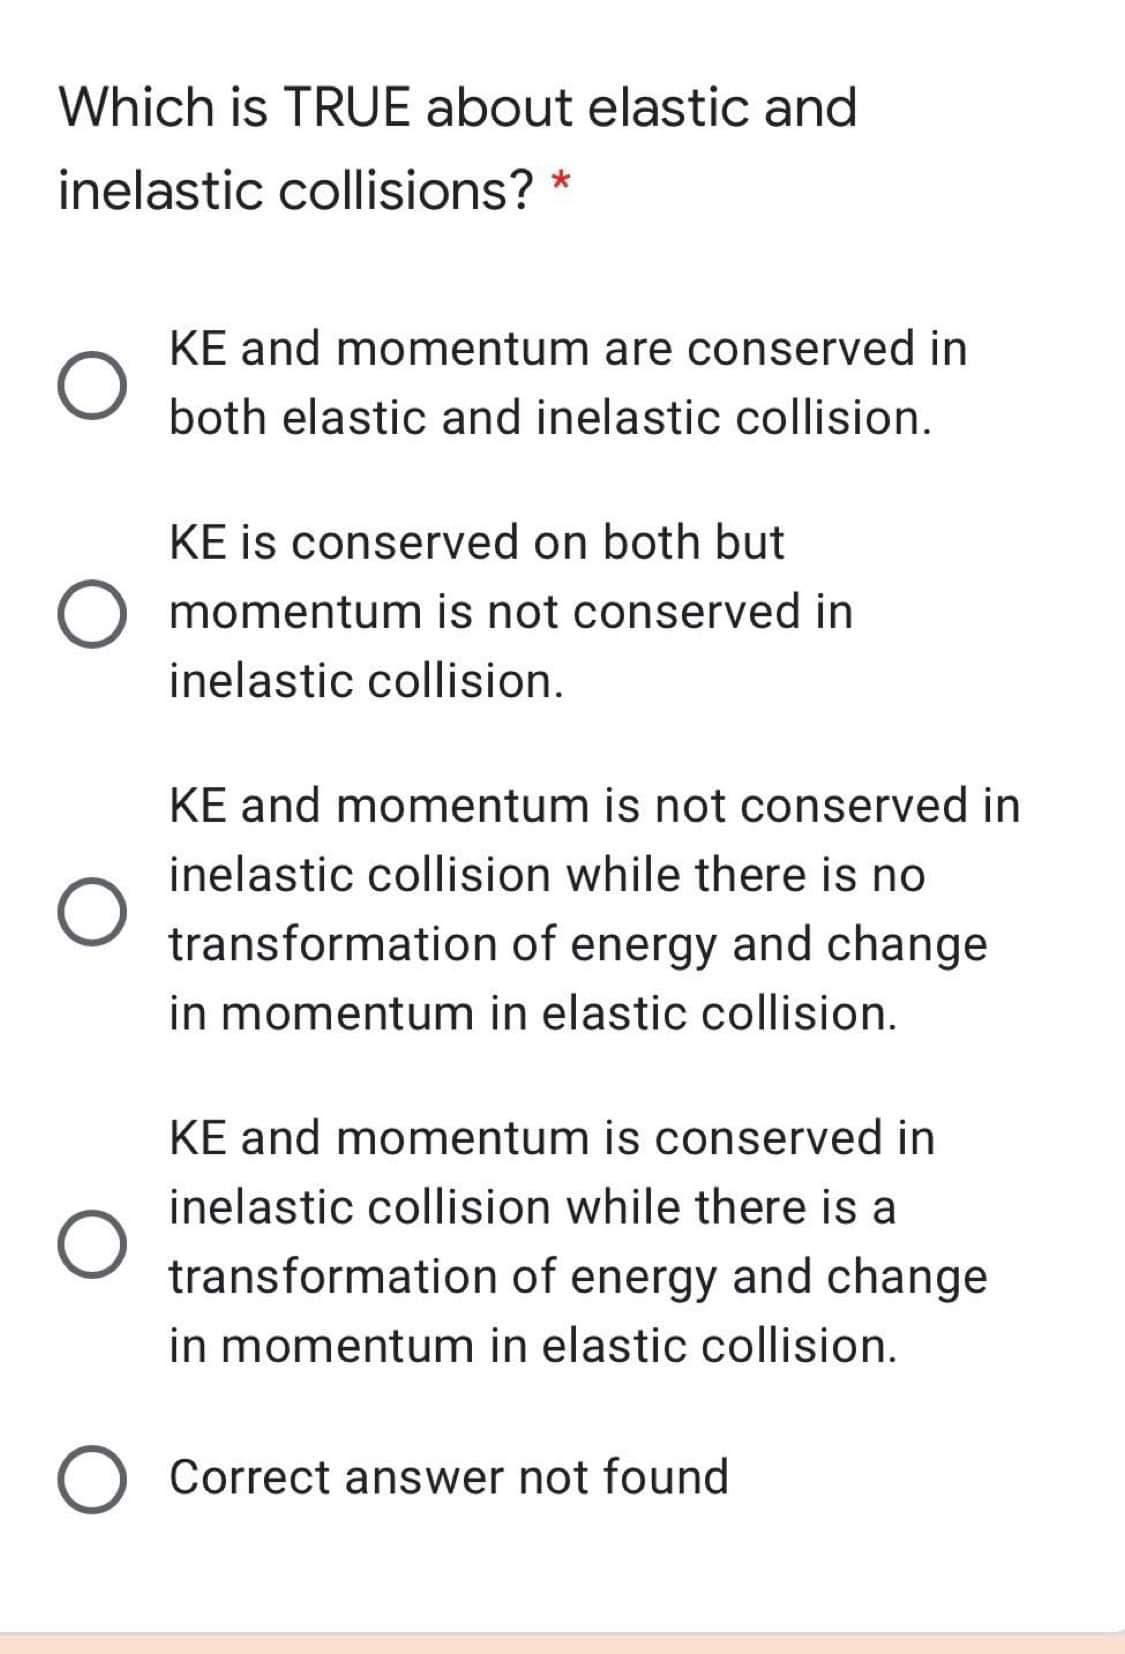 Which is TRUE about elastic and
inelastic collisions? *
KE and momentum are conserved in
both elastic and inelastic collision.
KE is conserved on both but
momentum is not conserved in
inelastic collision.
KE and momentum is not conserved in
inelastic collision while there is no
transformation of energy and change
in momentum in elastic collision.
KE and momentum is conserved in
inelastic collision while there is a
transformation of energy and change
in momentum in elastic collision.
Correct answer not found
